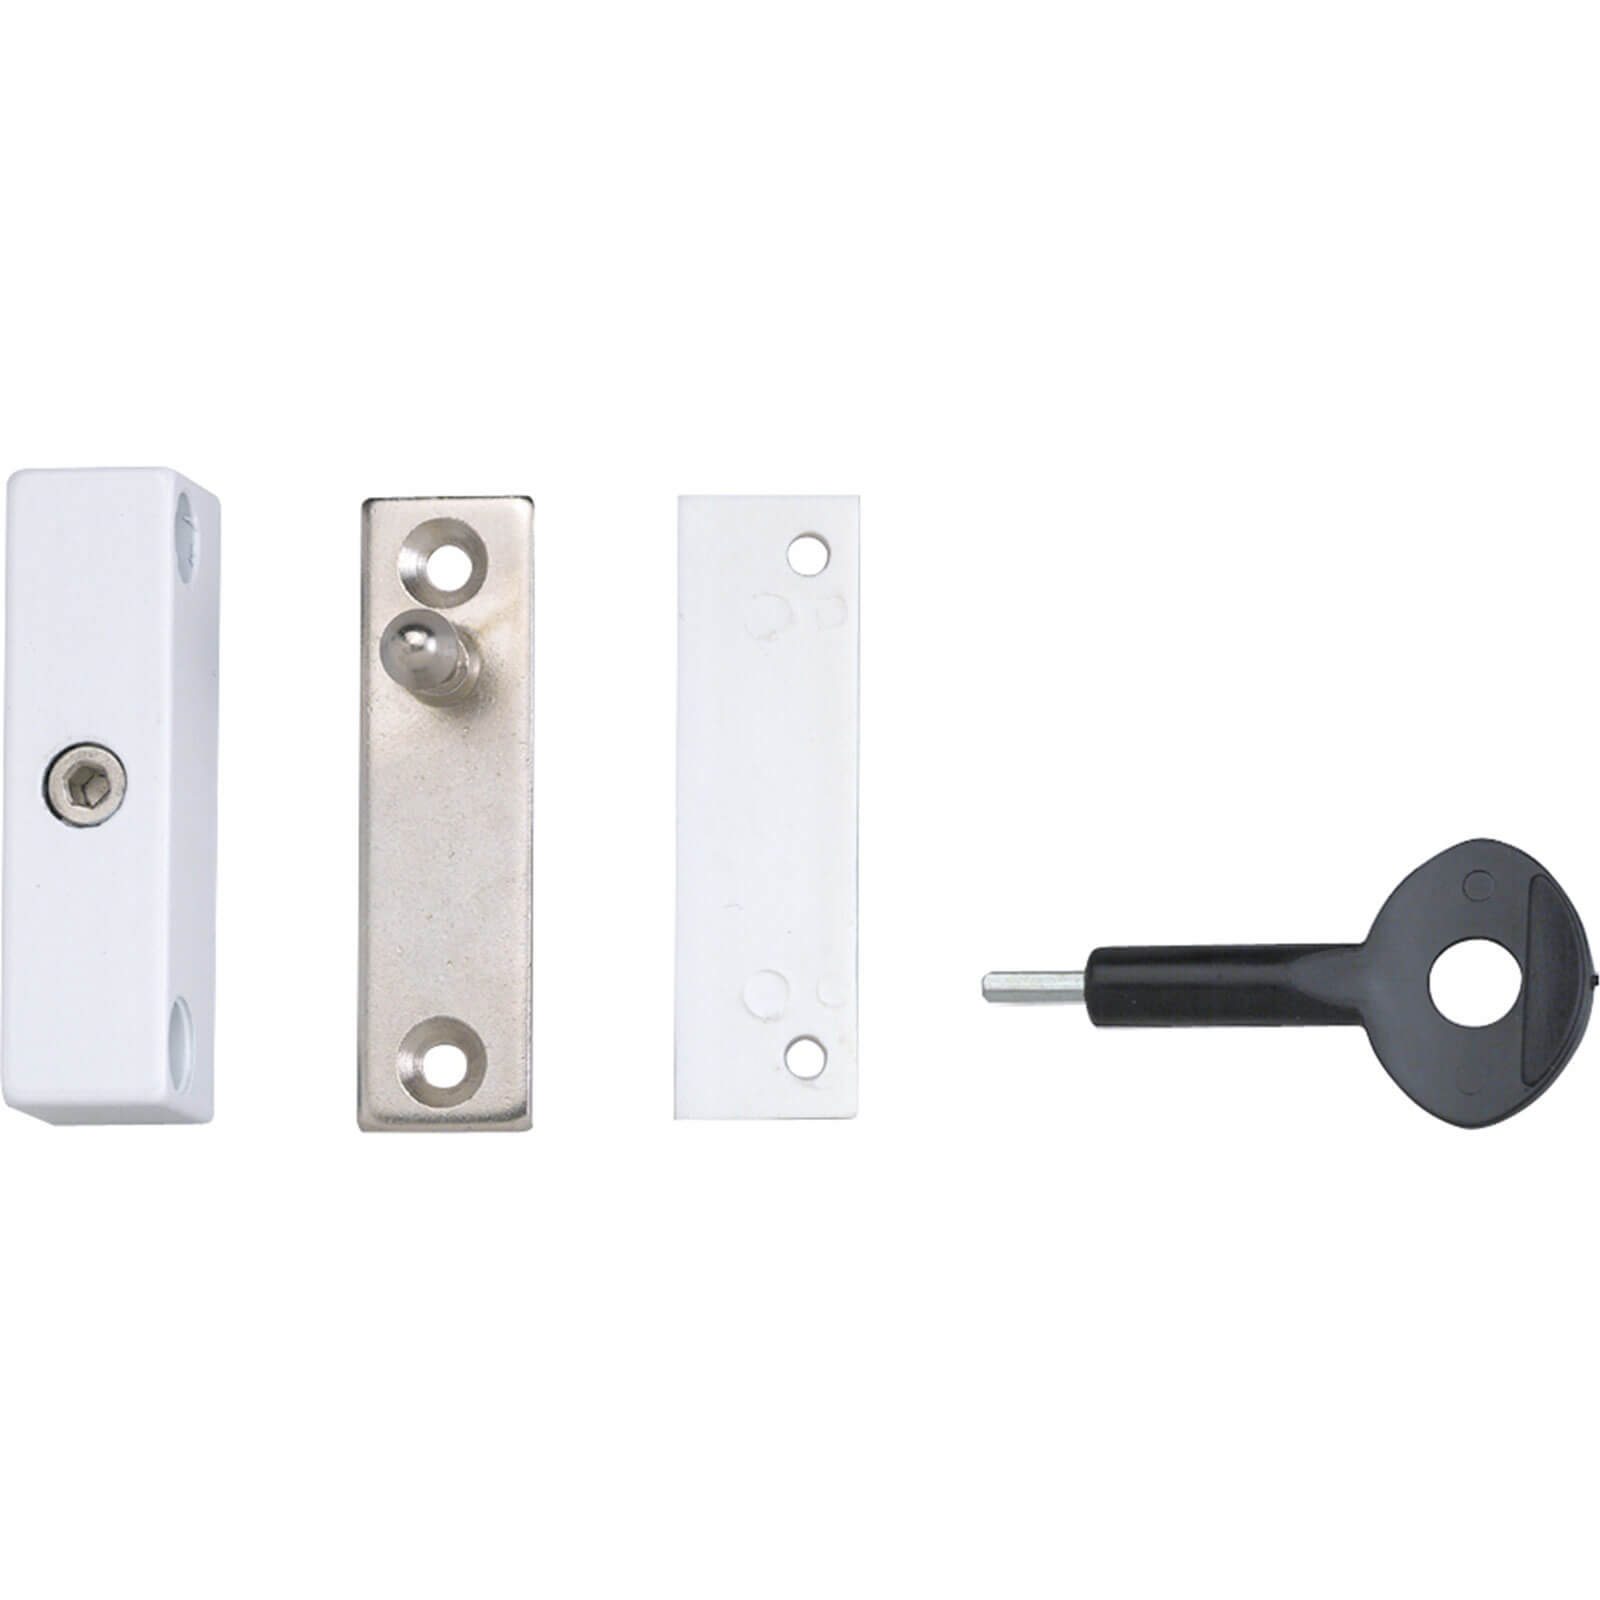 Image of Yale P118 Auto Window Lock White Pack of 2